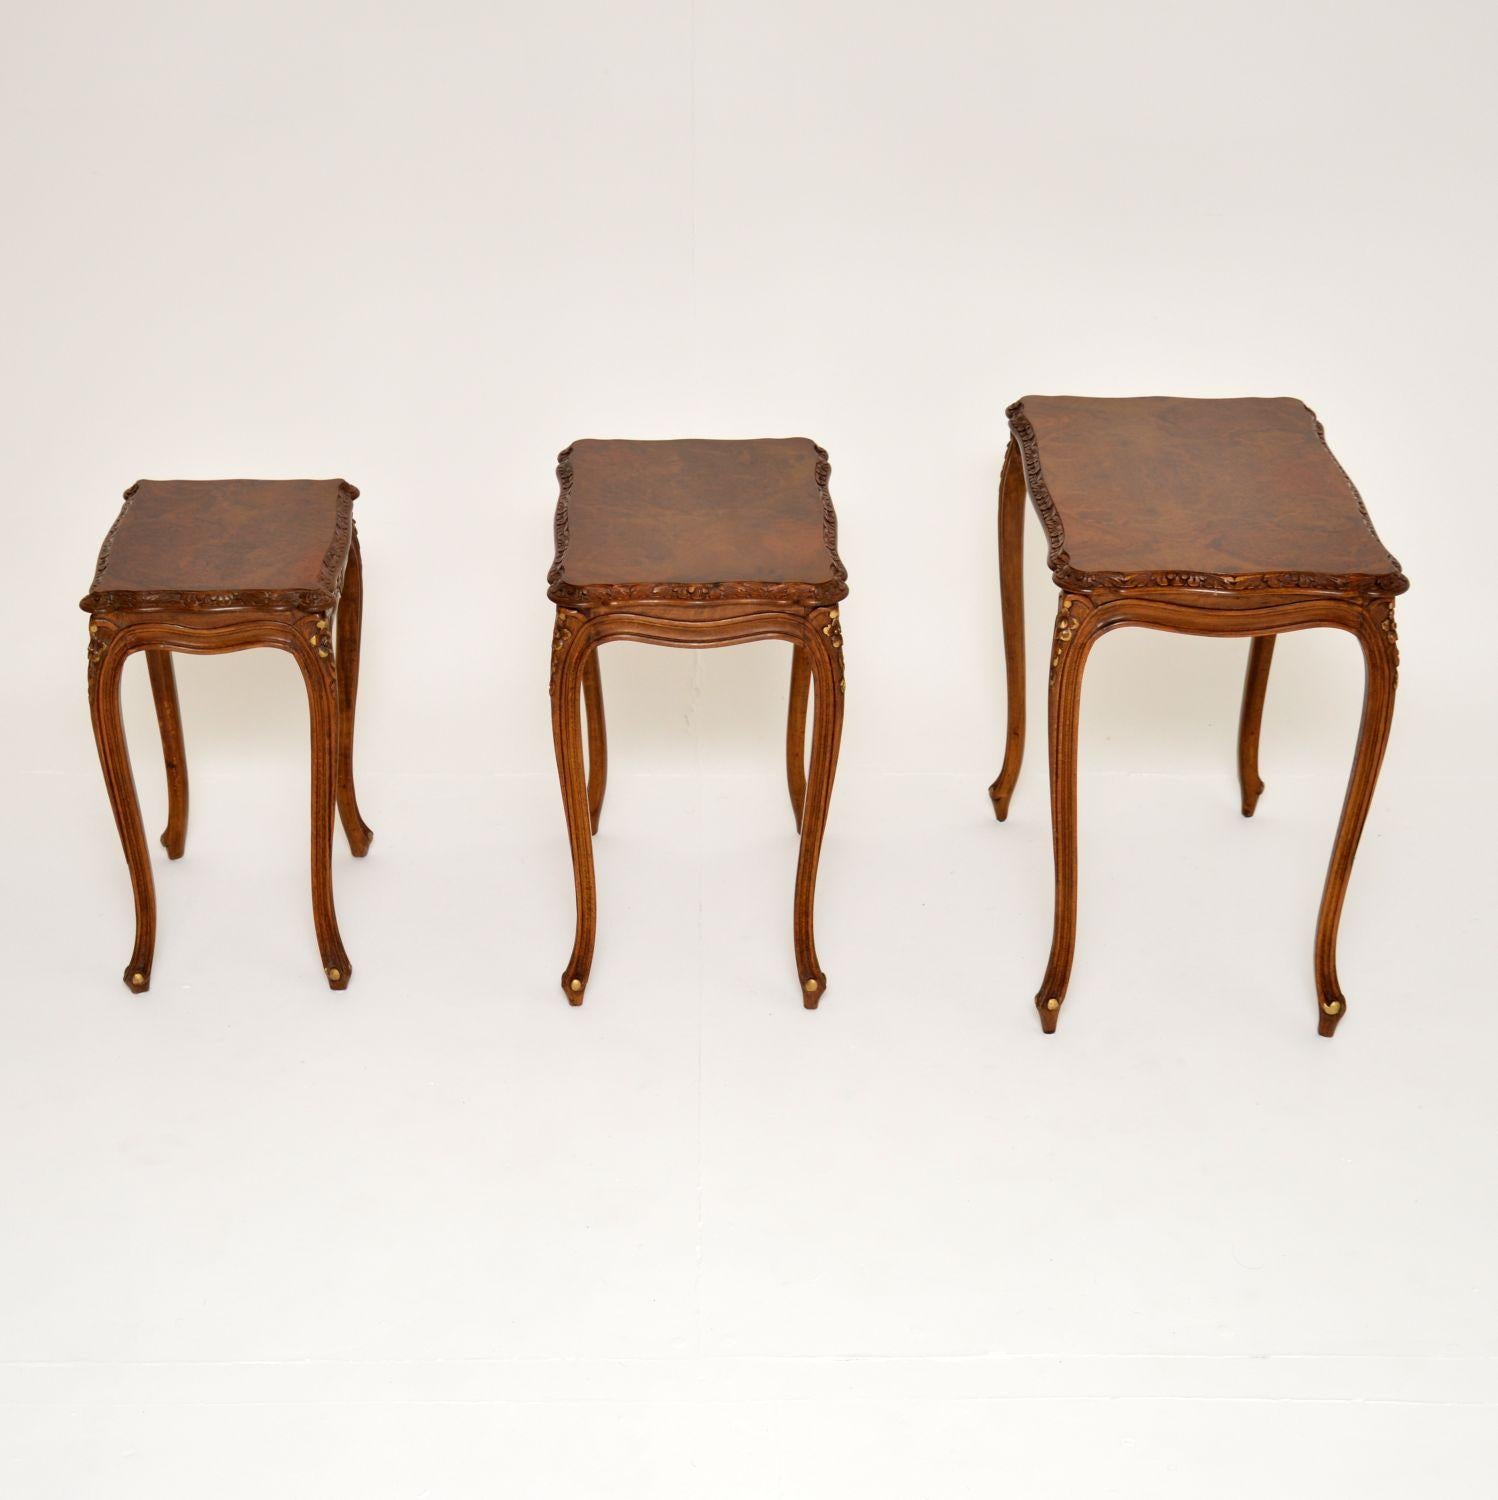 Mid-20th Century Antique French Burr Walnut Nest of Tables For Sale